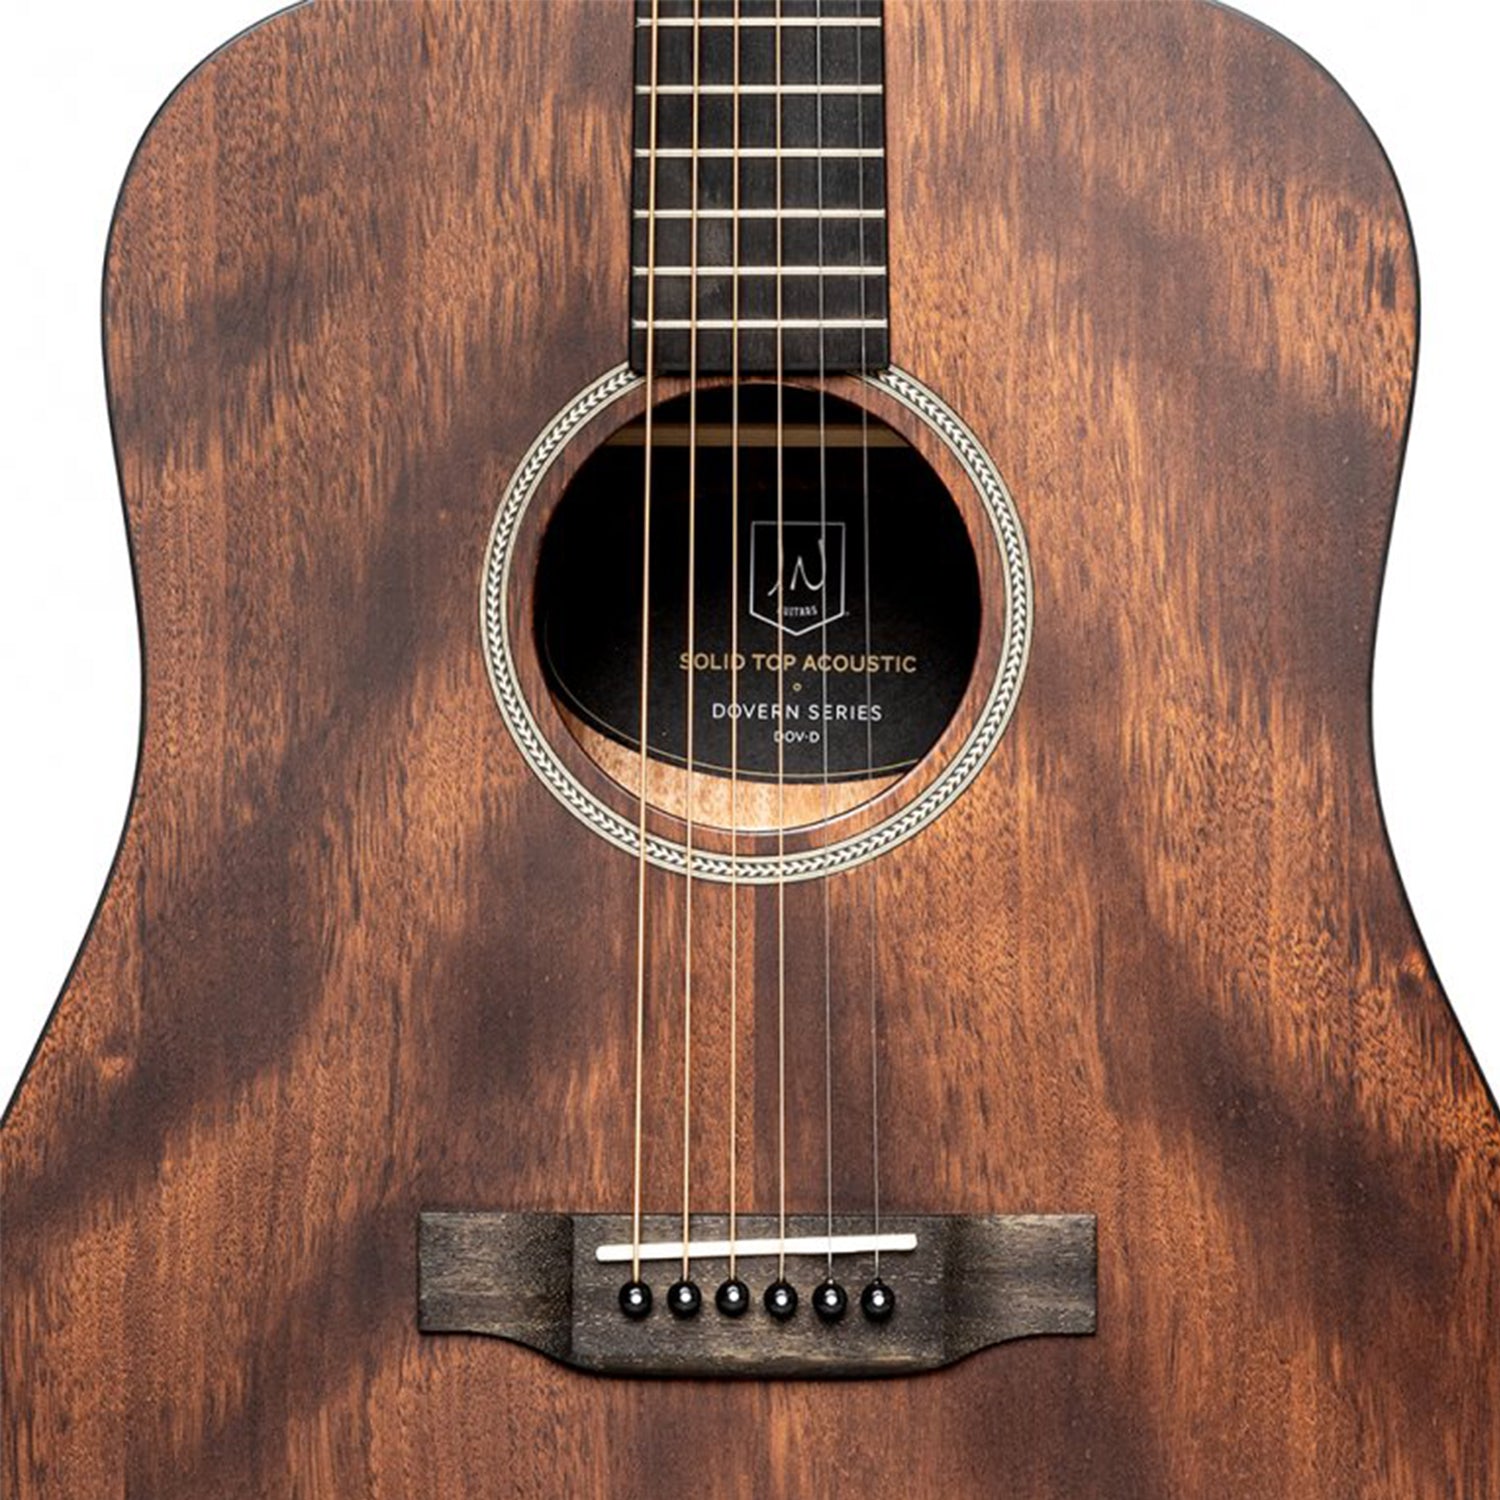 J.N.Guitars DOV-D Acoustic Dreadnought Guitar with Solid Mahogany Top, Dovern series